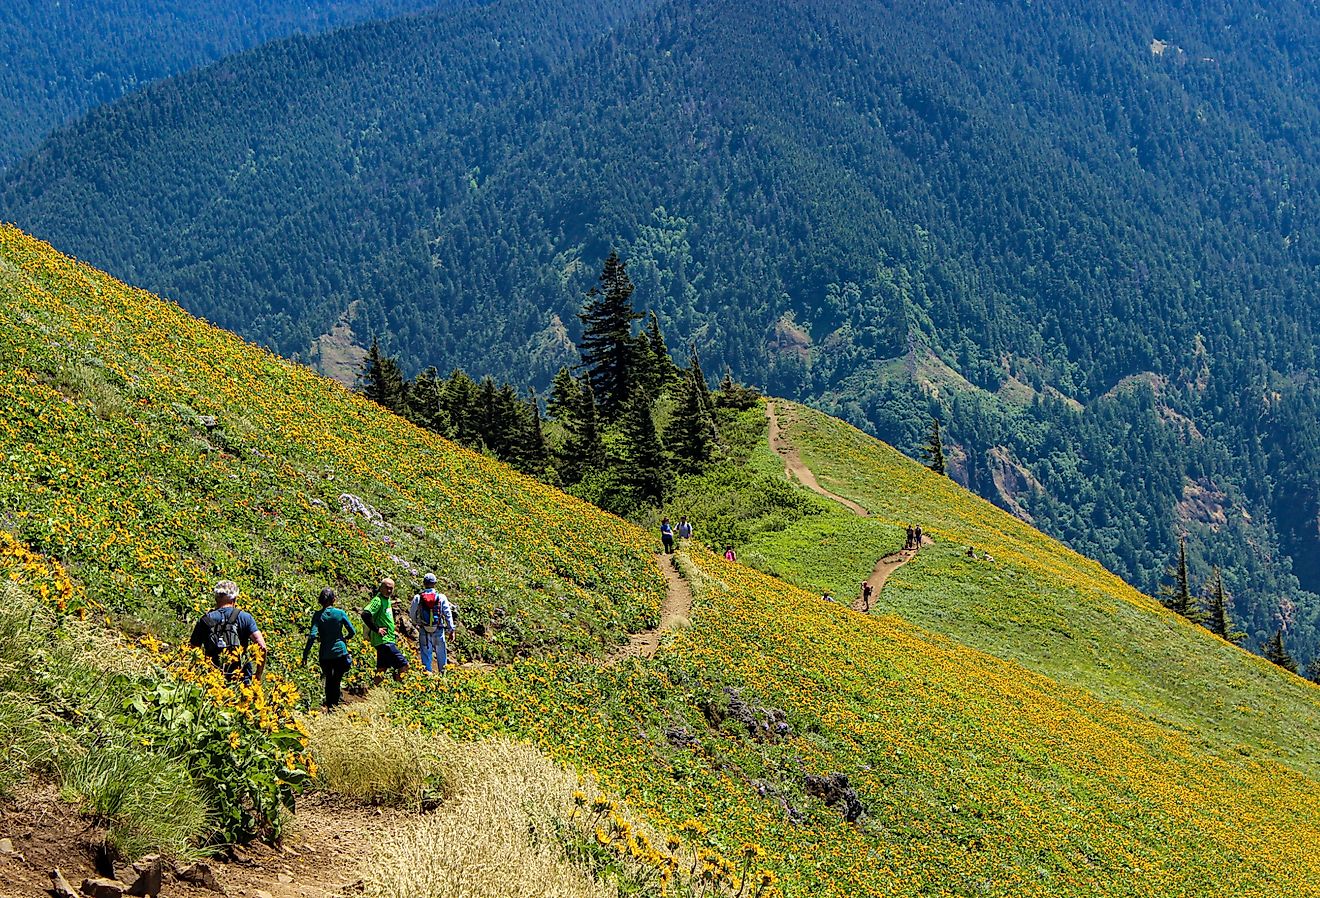 Hikers on the Dog Mountain trail in Washington state's Columbia River Gorge; White Salmon. Image credit Laura Kneedler via Shutterstock.